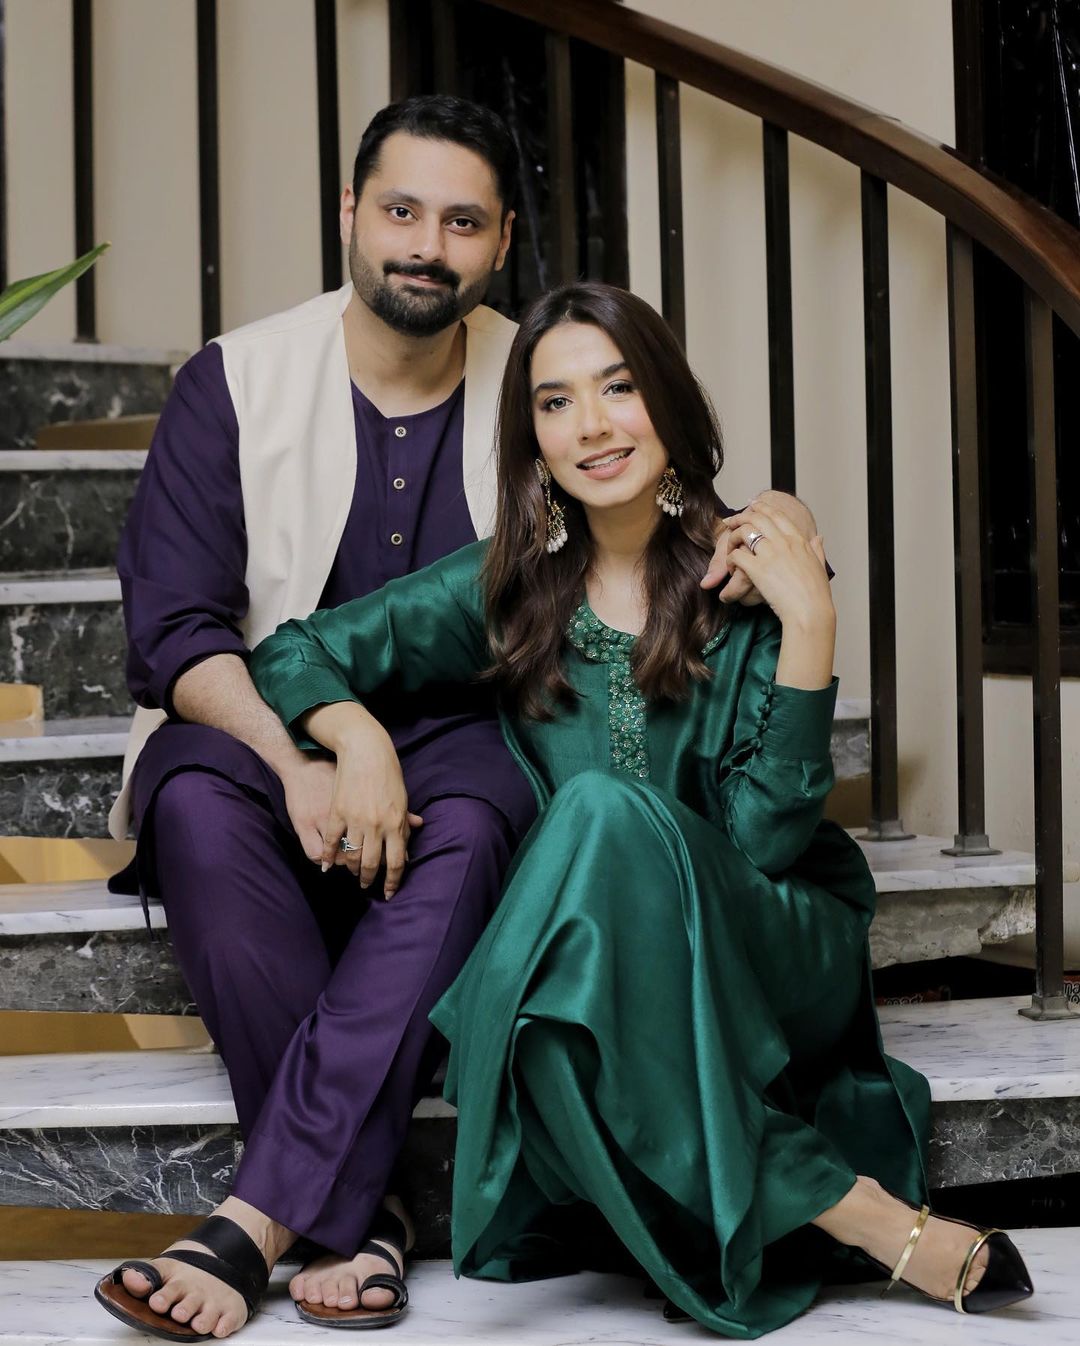 ‘Why would I dwell on her past?’: Jibran Nasir responds to why Mansha Pasha’s first marriage doesn’t bother him